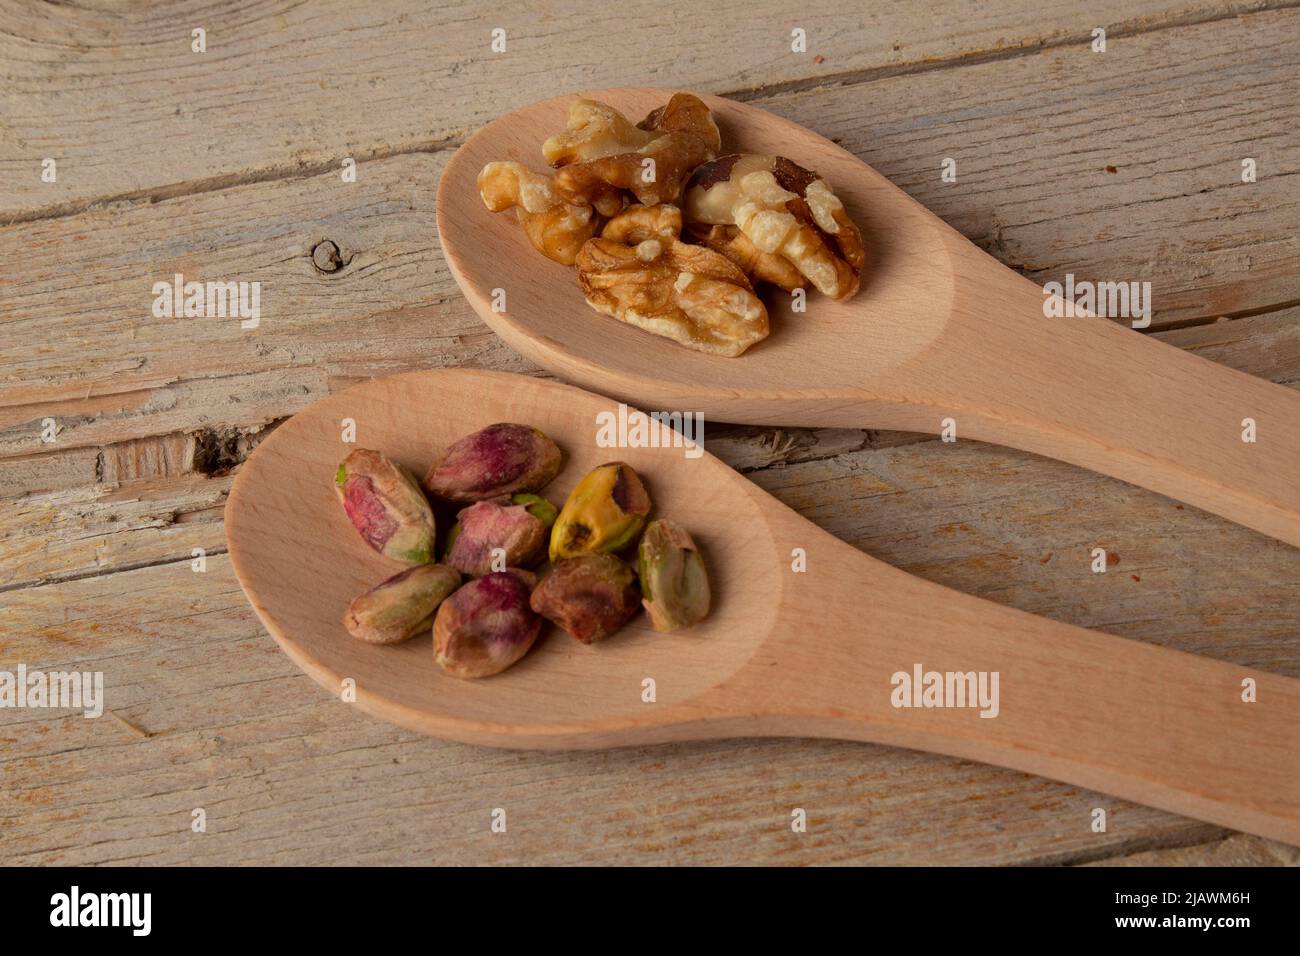 Photograph of some wooden spoons with walnuts and pistachios. Stock Photo